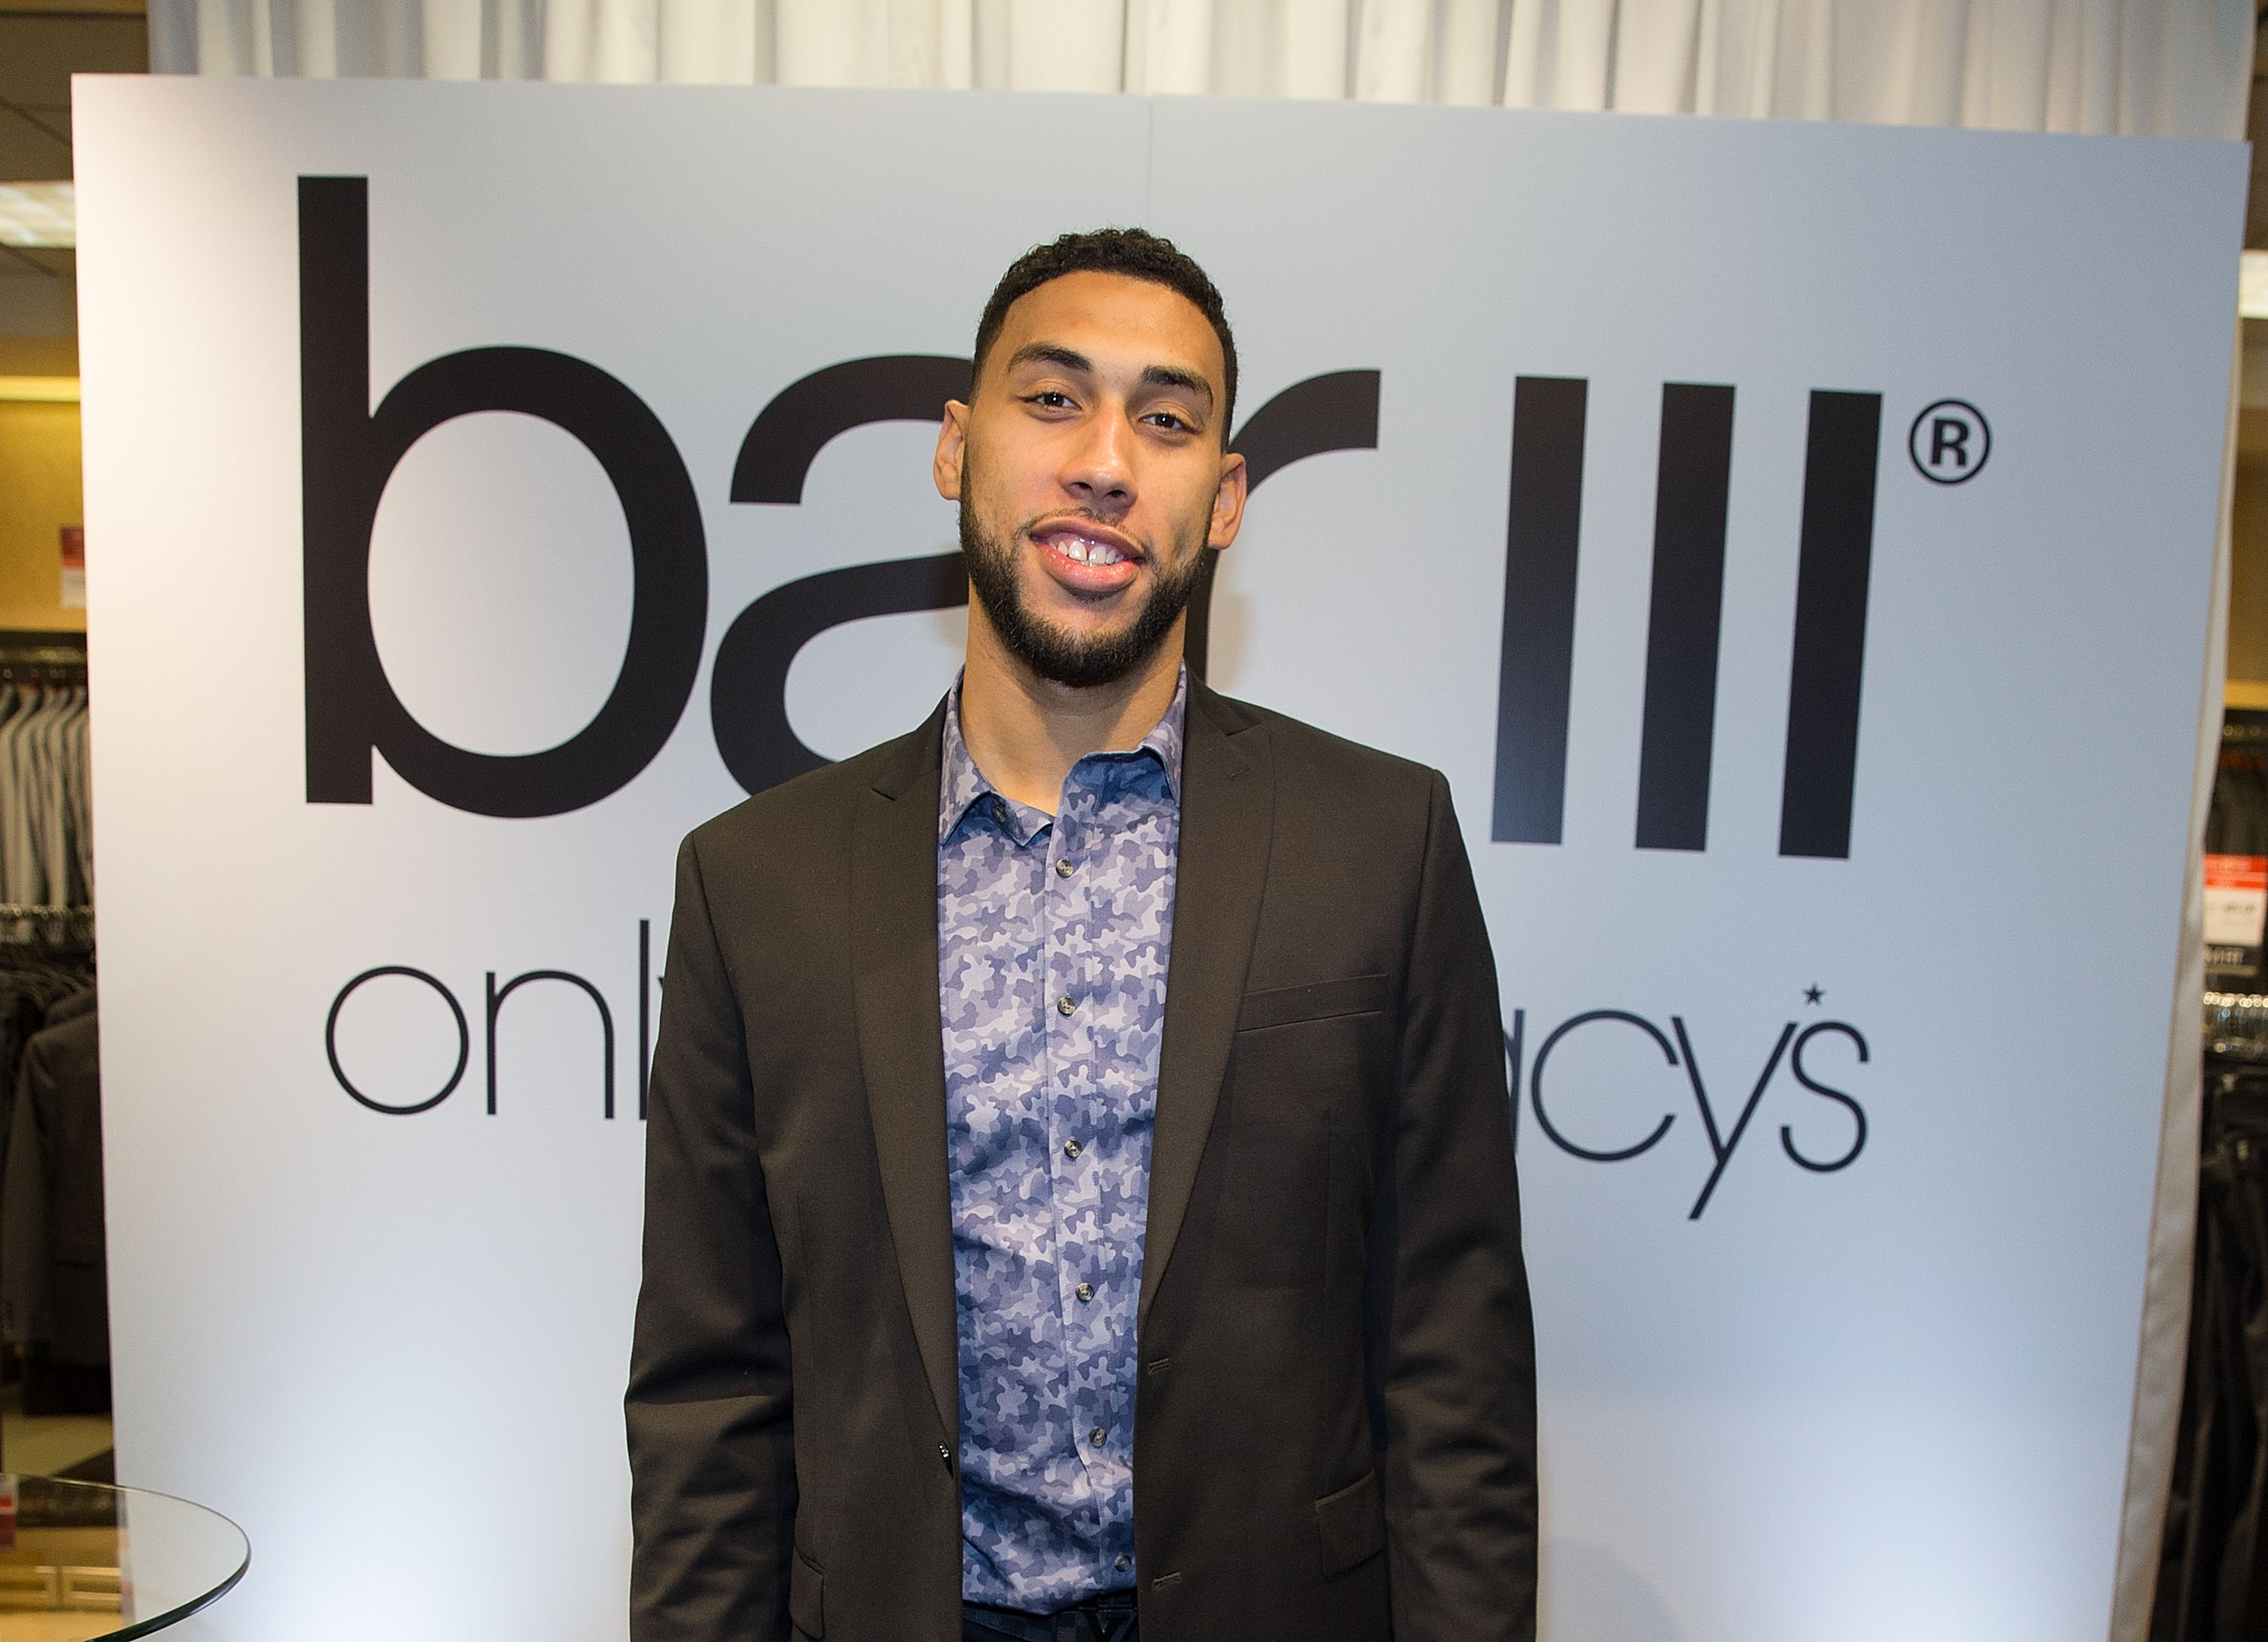 CHICAGO, IL - SEPTEMBER 23: Chicago Bulls rookie Denzel Valentine at the Bar III event at Macy's State Street on September 23, 2016 in Chicago, Illinois. (Photo by Tasos Katopodis/Getty Images for Bar III)